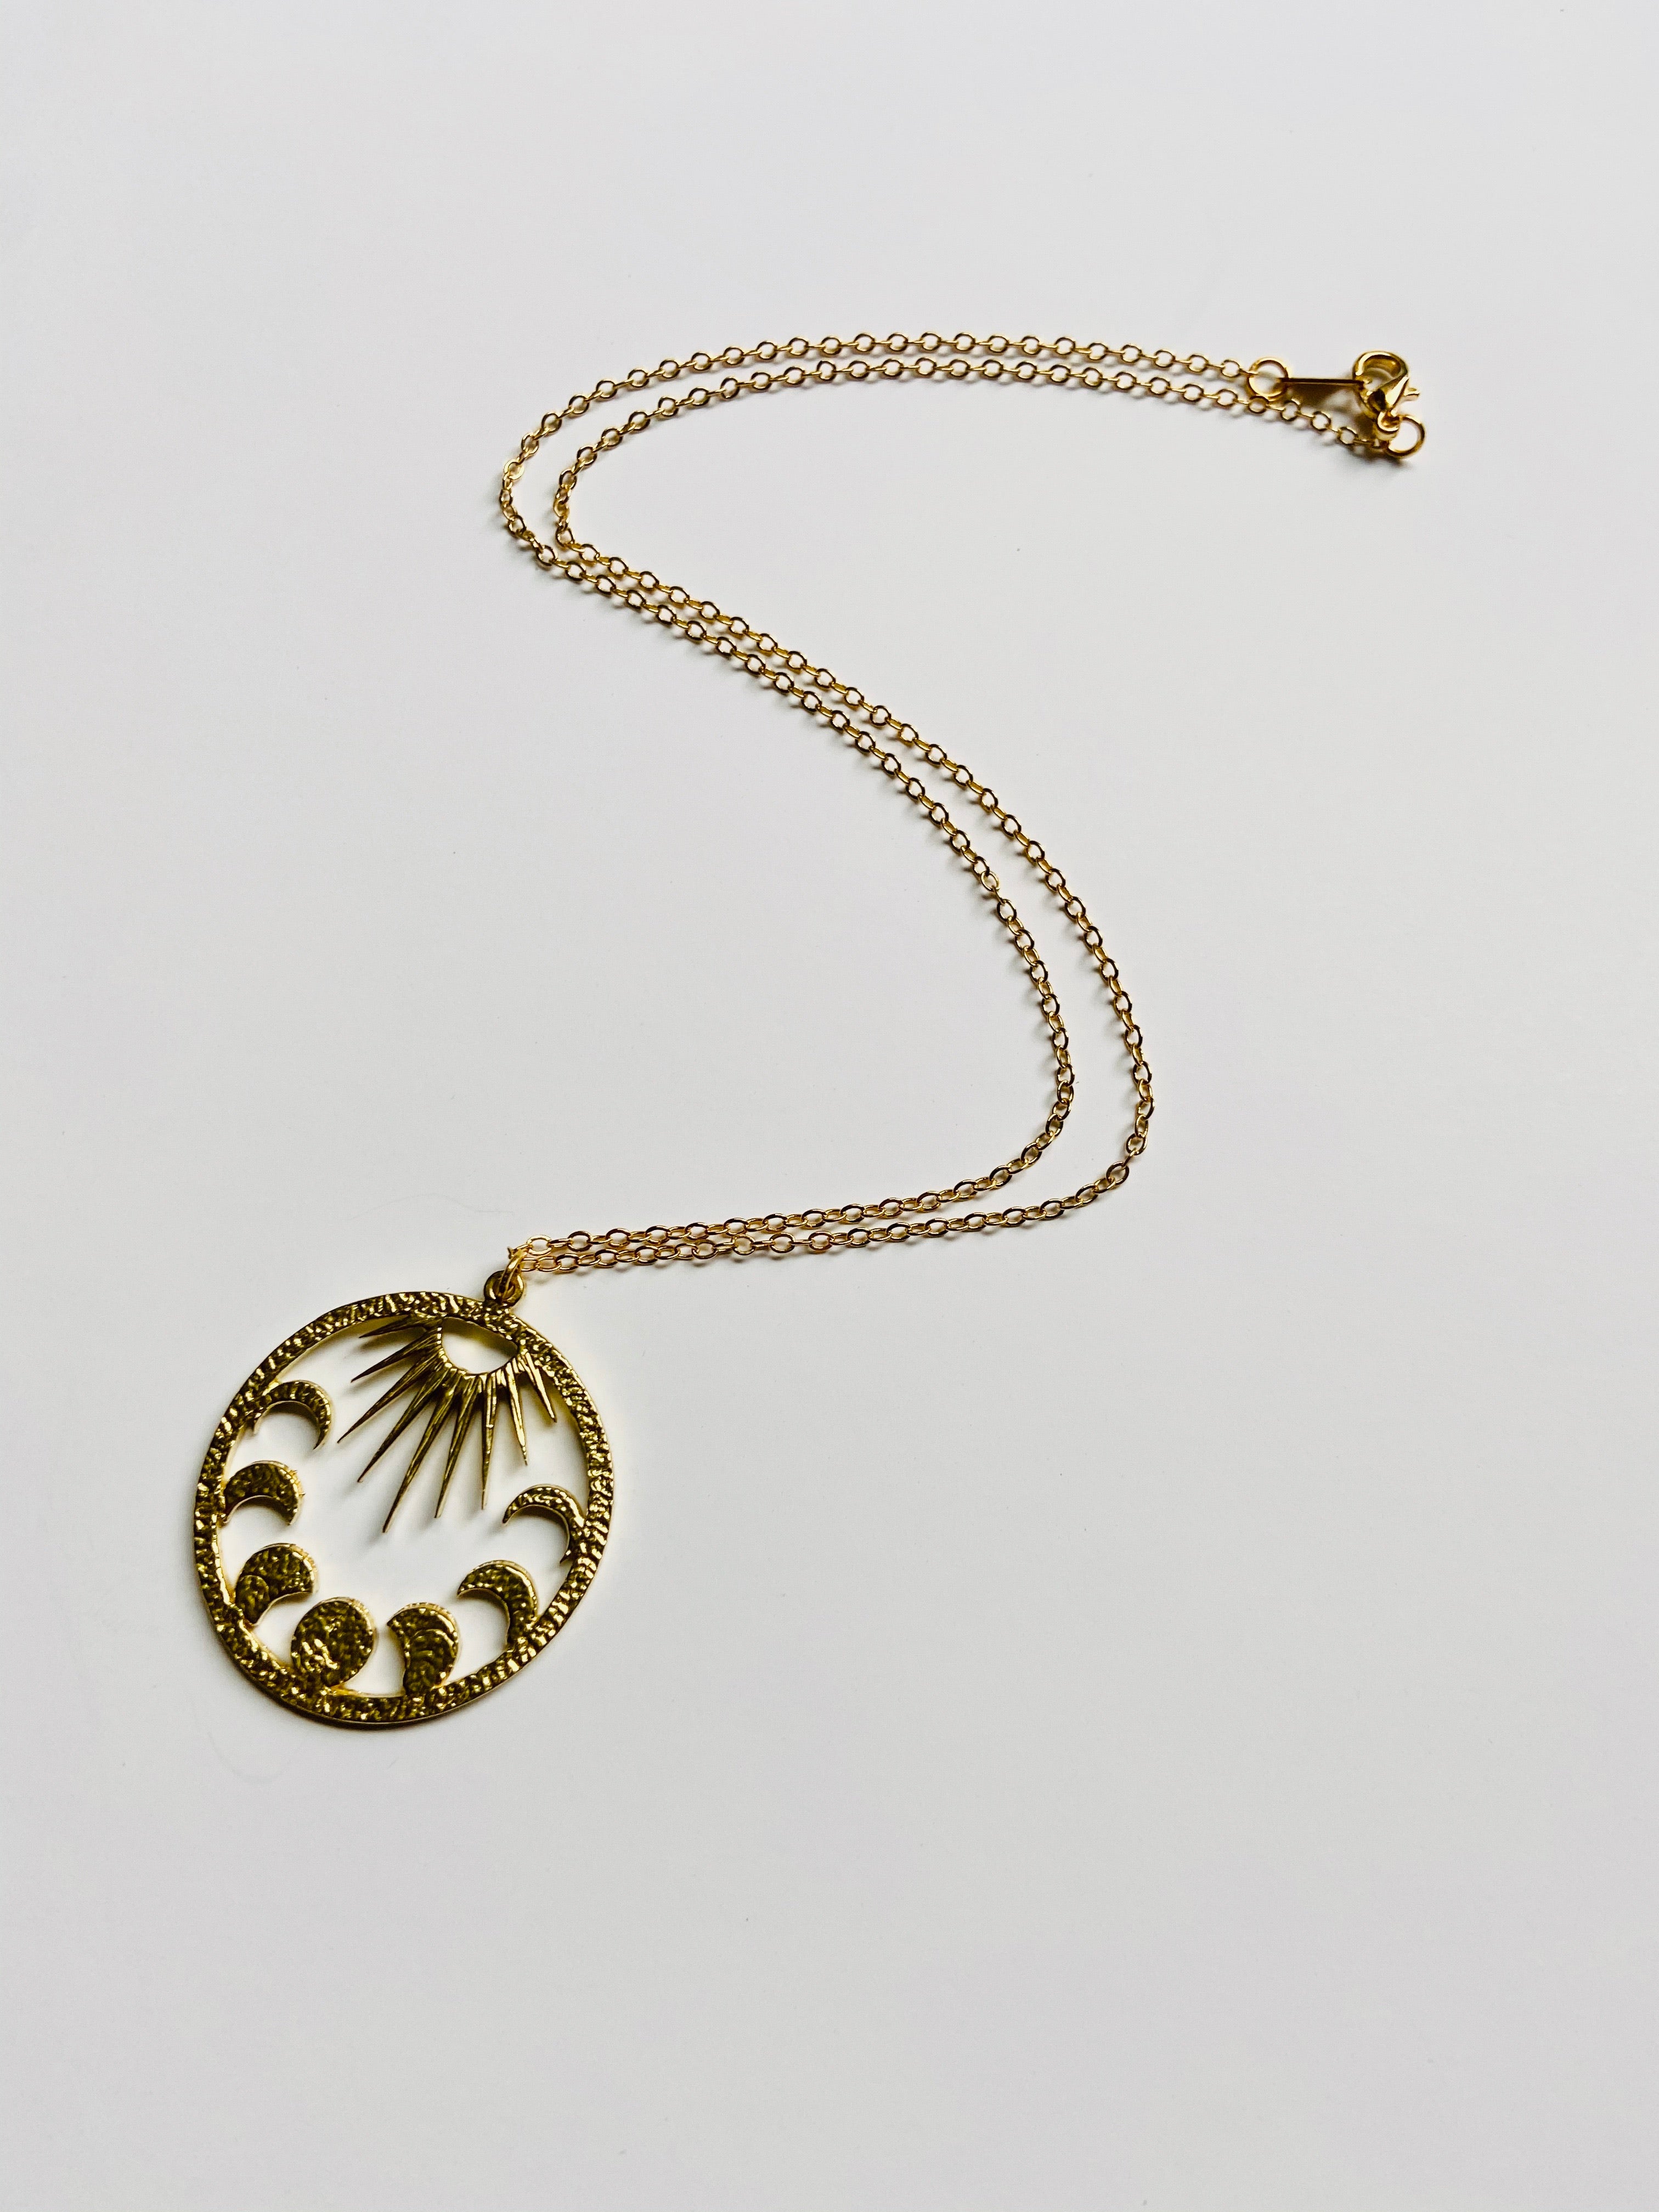 Buy Gold Sun and Moon Charm Necklace, 24k Gold Plated Pewter Charm,  Soulmates, Gift for Her Online in India - Etsy